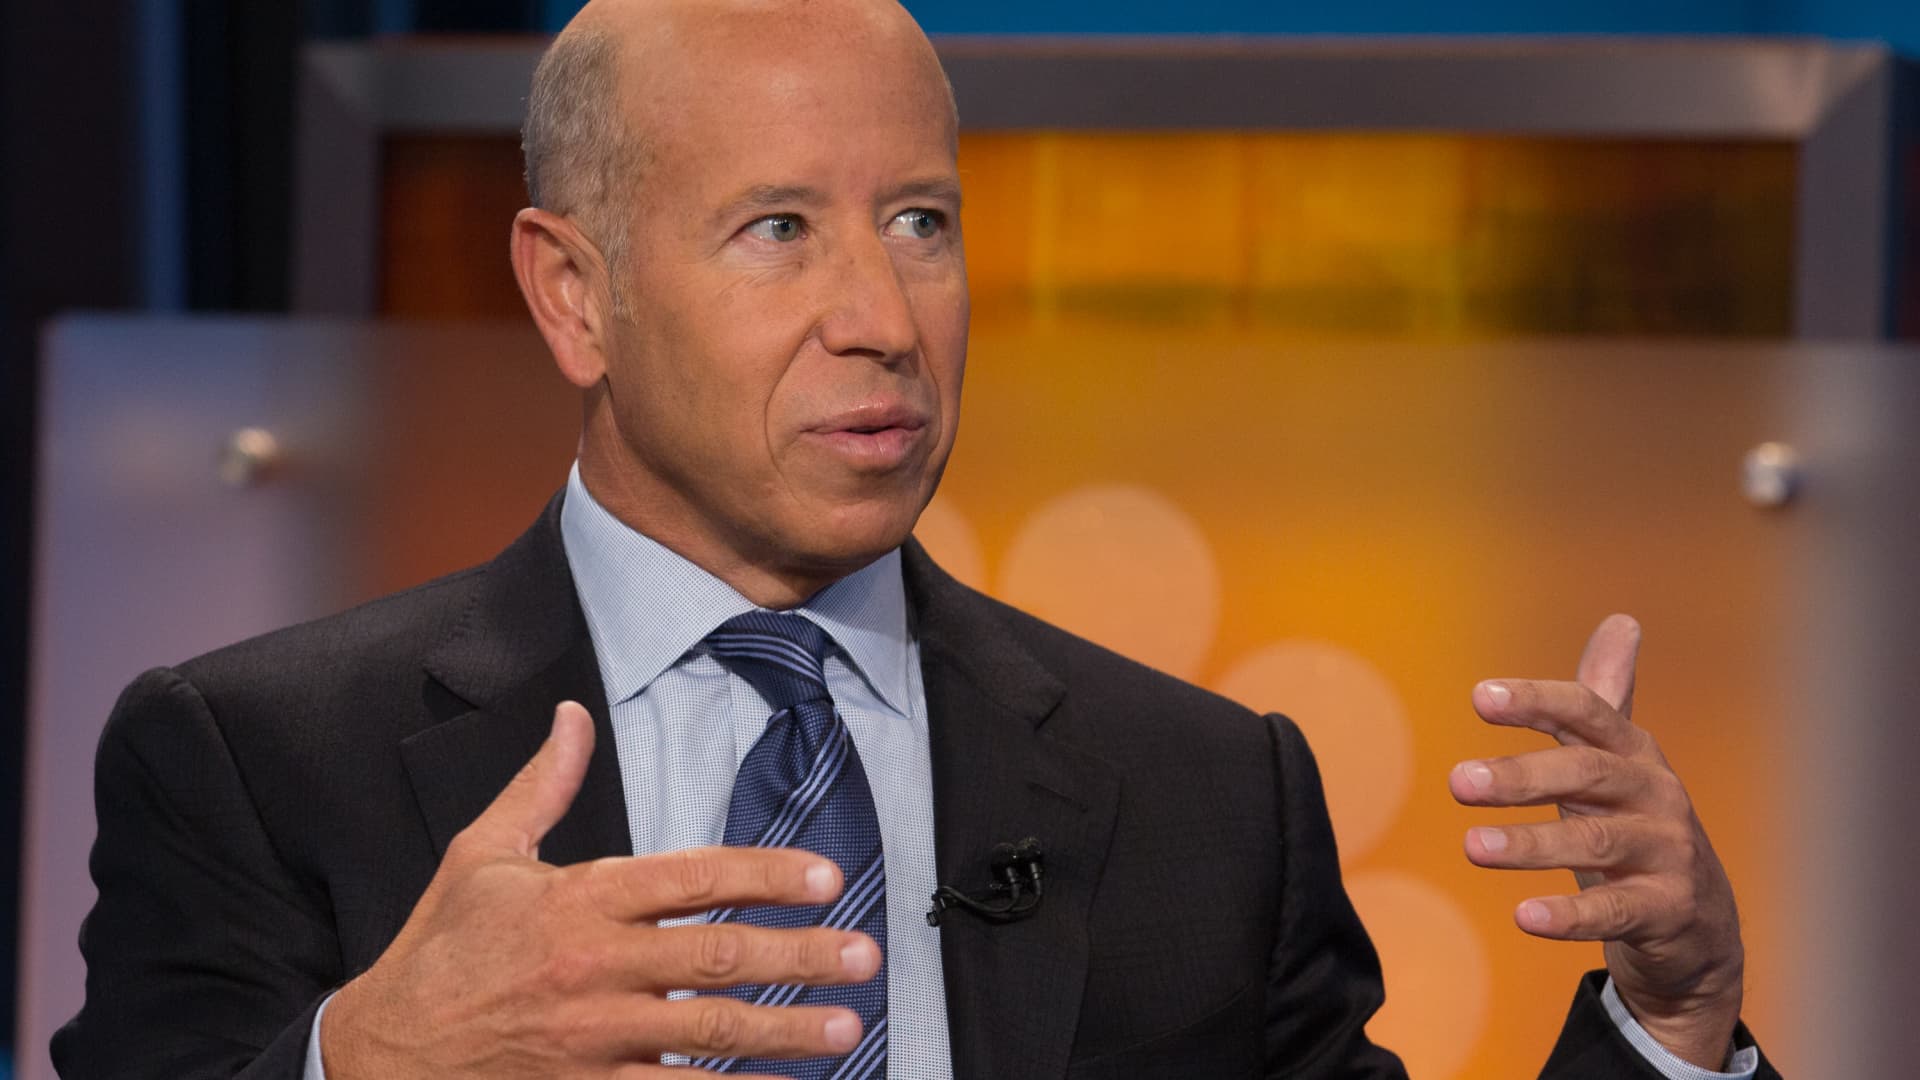 Fed policymakers will see ‘they blew it’ with interest rate hikes, predicts Starwood Capital’s Barry Sternlicht